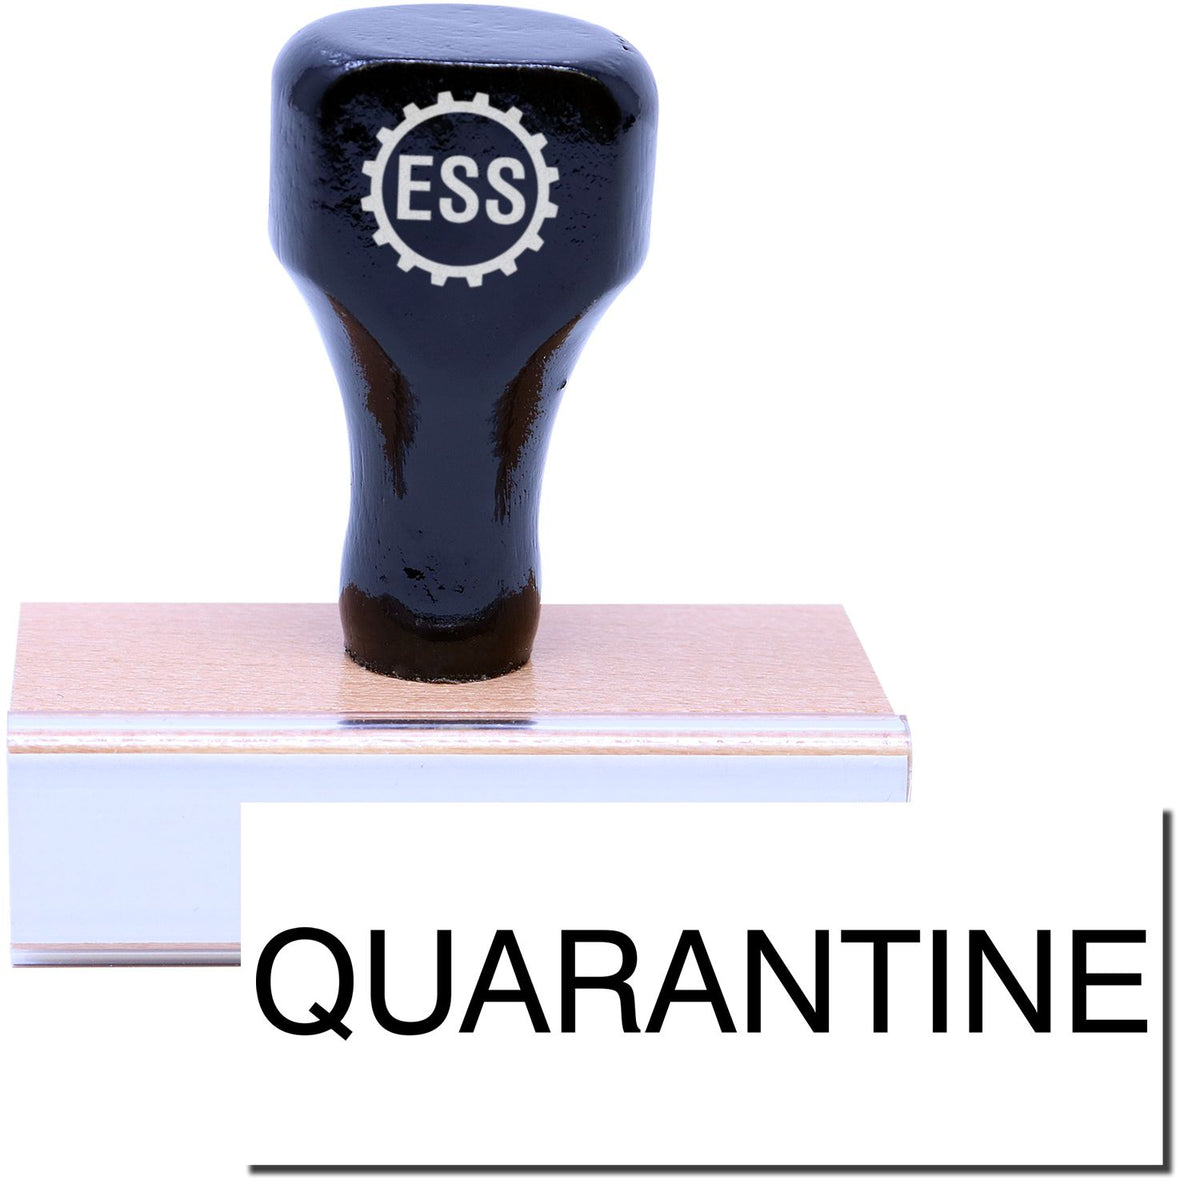 A stock office rubber stamp with a stamped image showing how the text &quot;QUARANTINE&quot; is displayed after stamping.